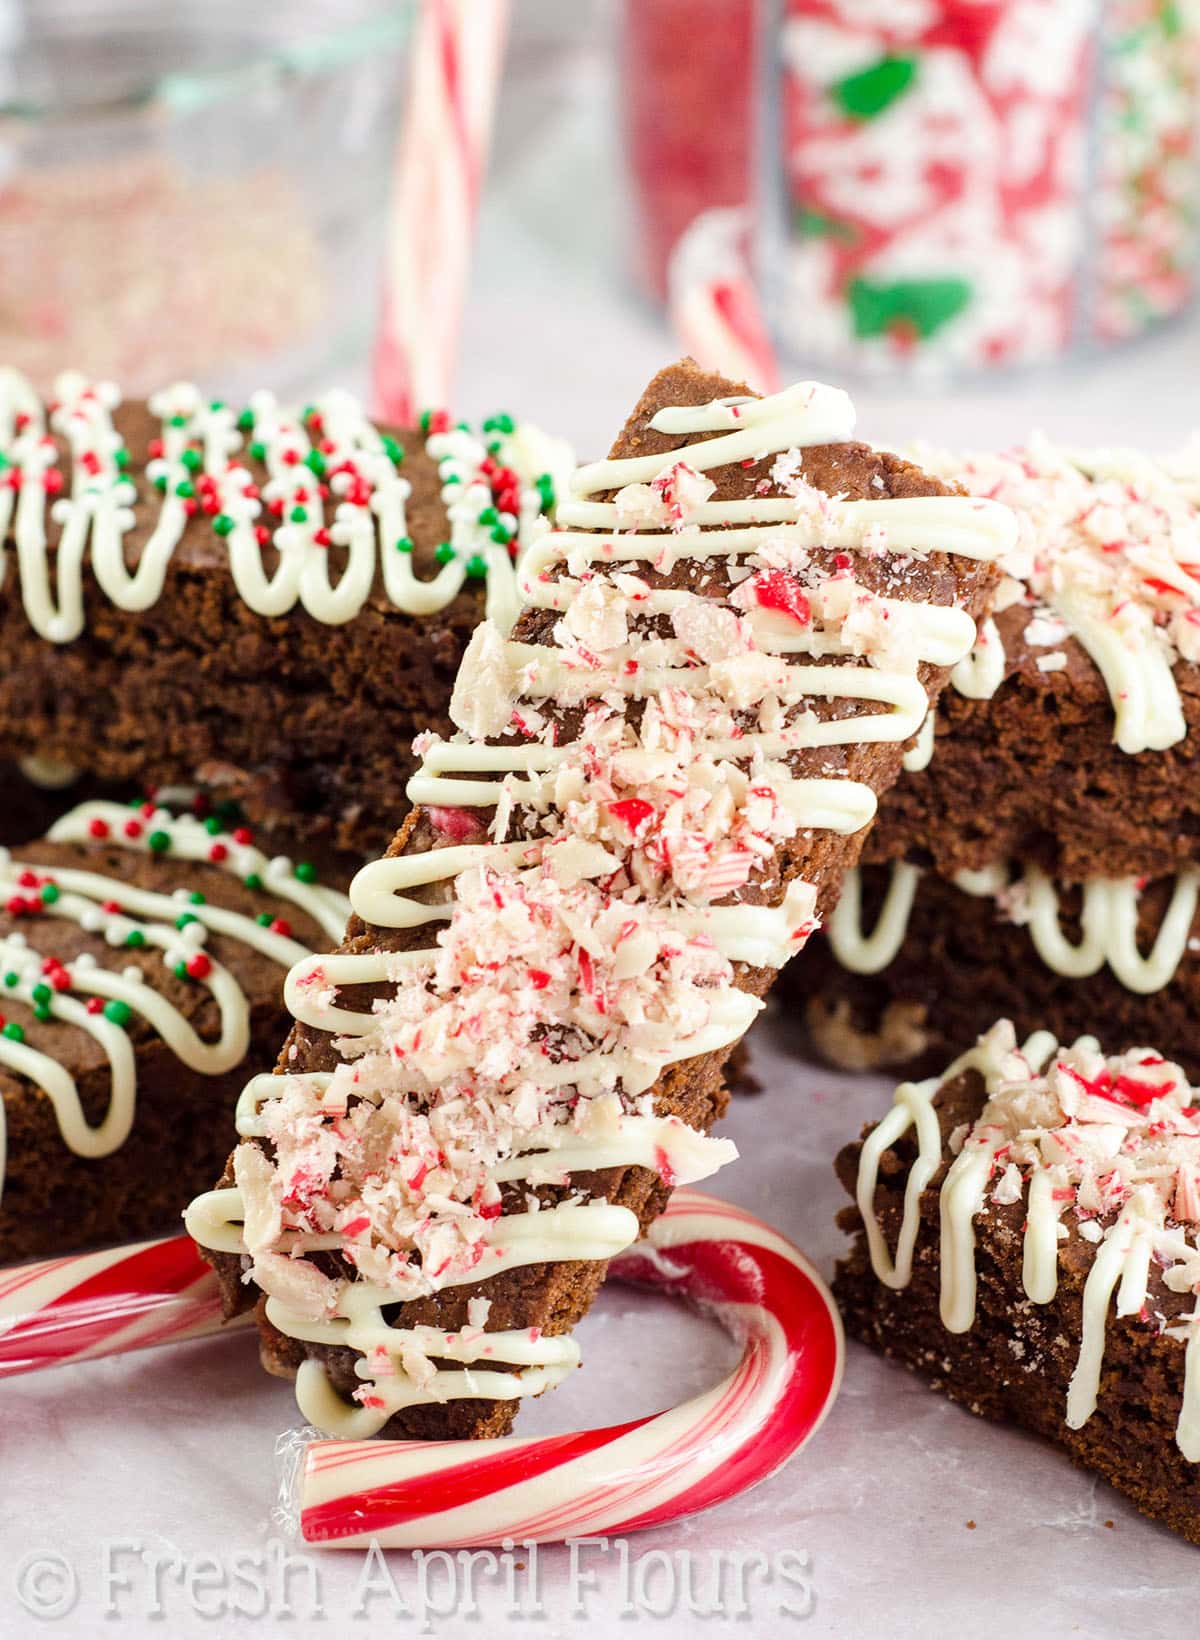 Chocolate Peppermint Biscotti: Chocolate biscotti bursting with peppermint flavor and bits of candy canes. Add a drizzle of white chocolate and some festive sprinkles and you have yourself a merry little dessert!